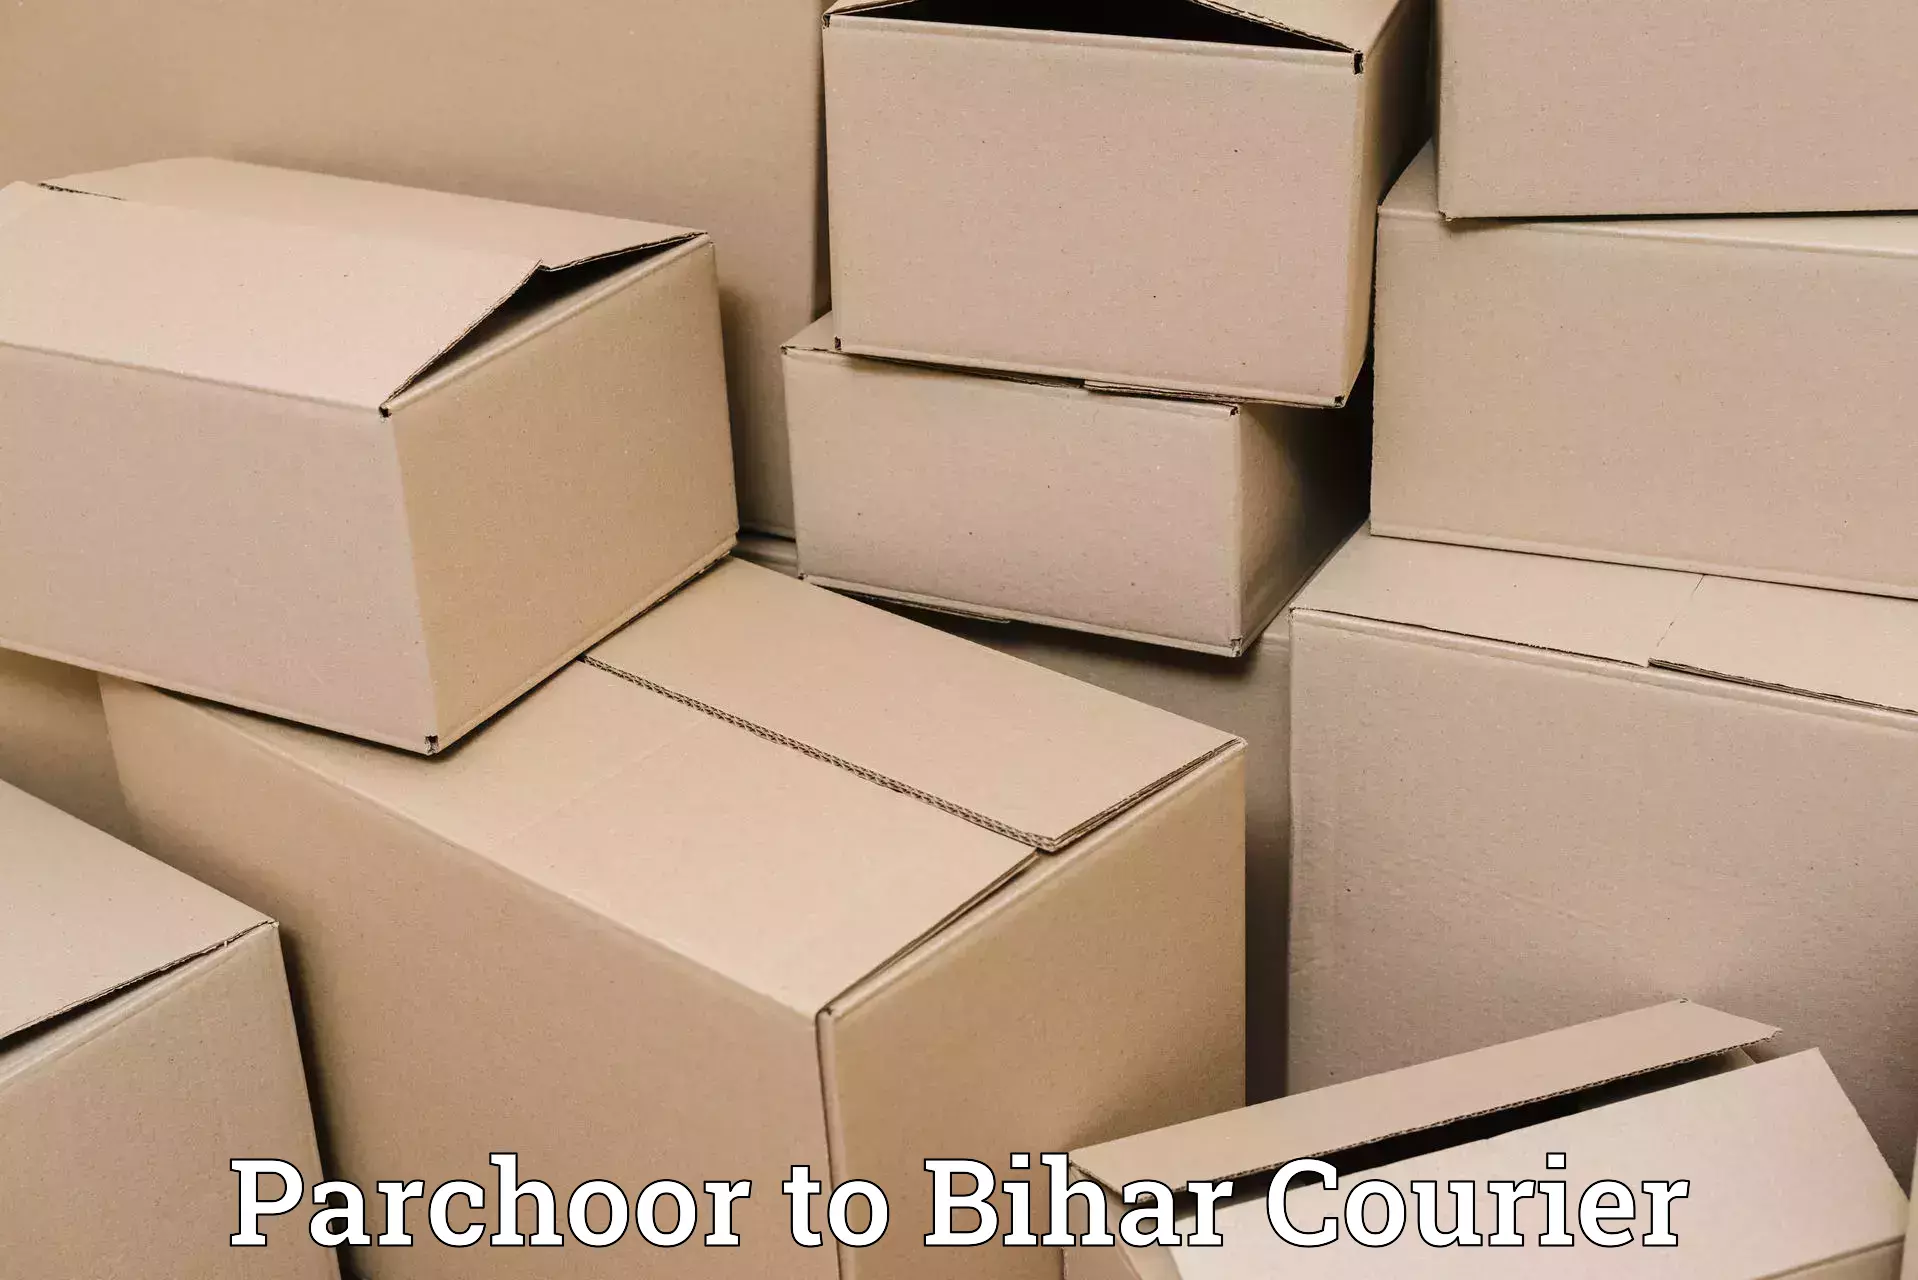 Fast shipping solutions Parchoor to Saharsa